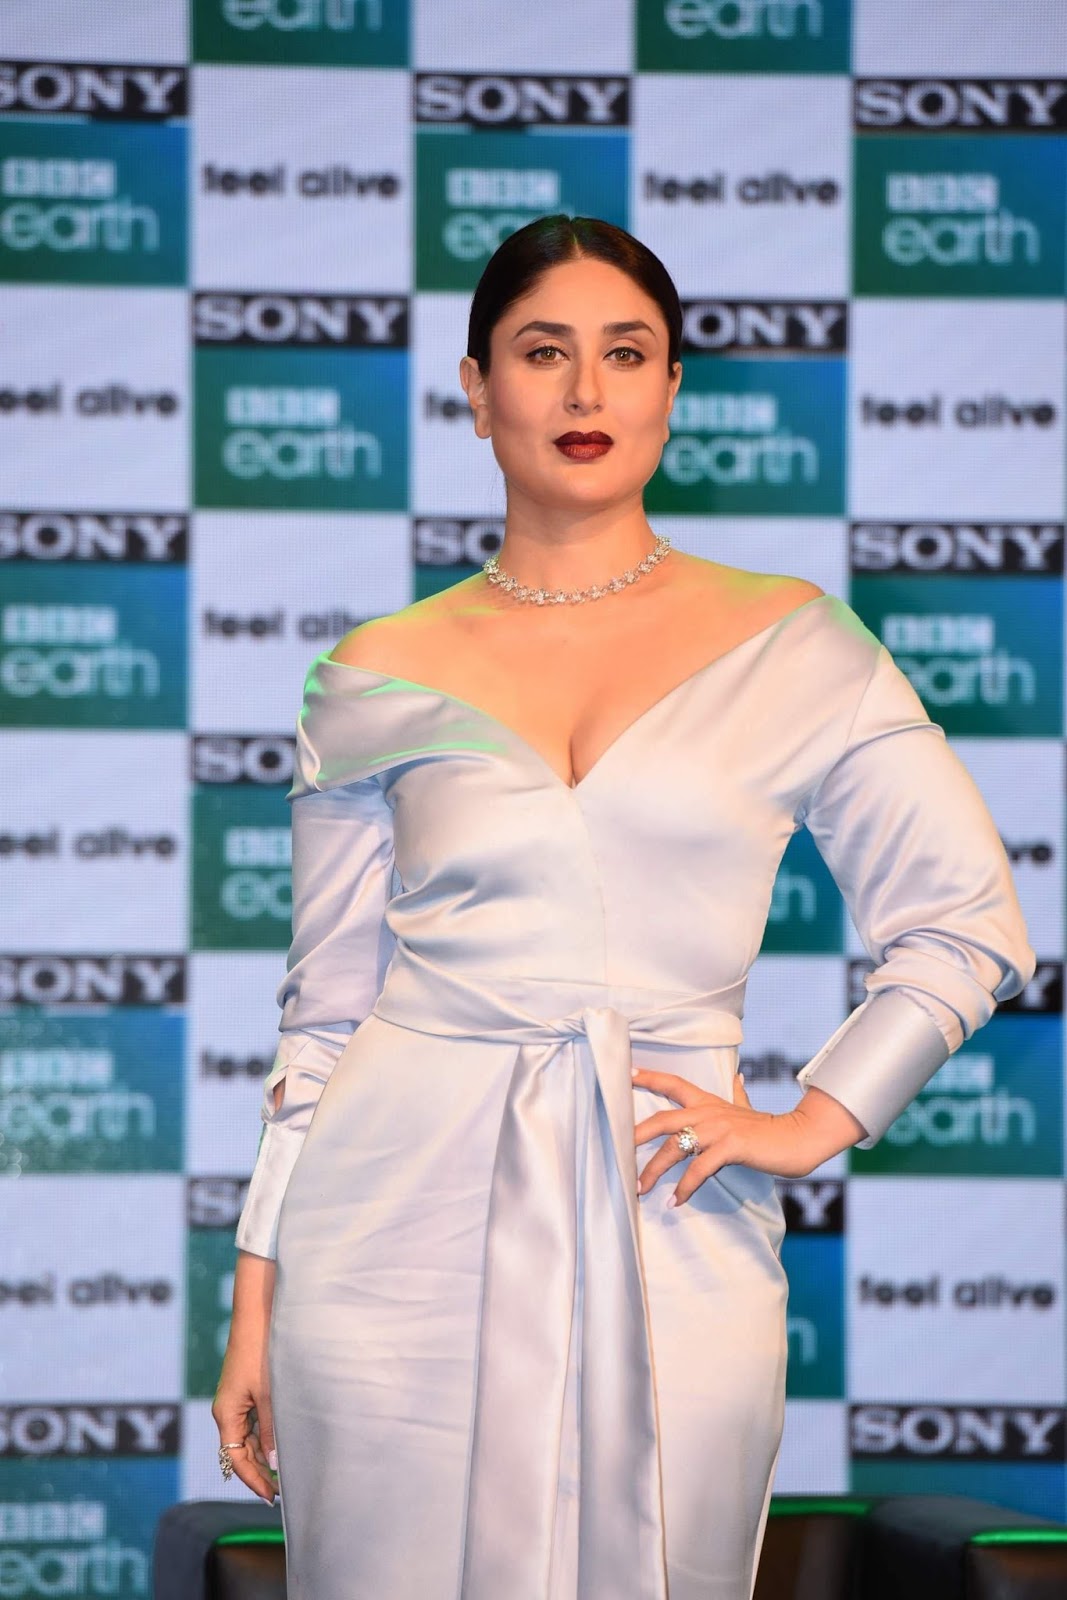 Kareena Kapoor Super Sexy Cleavage Show At The Launch Event of Sony BBC Earth